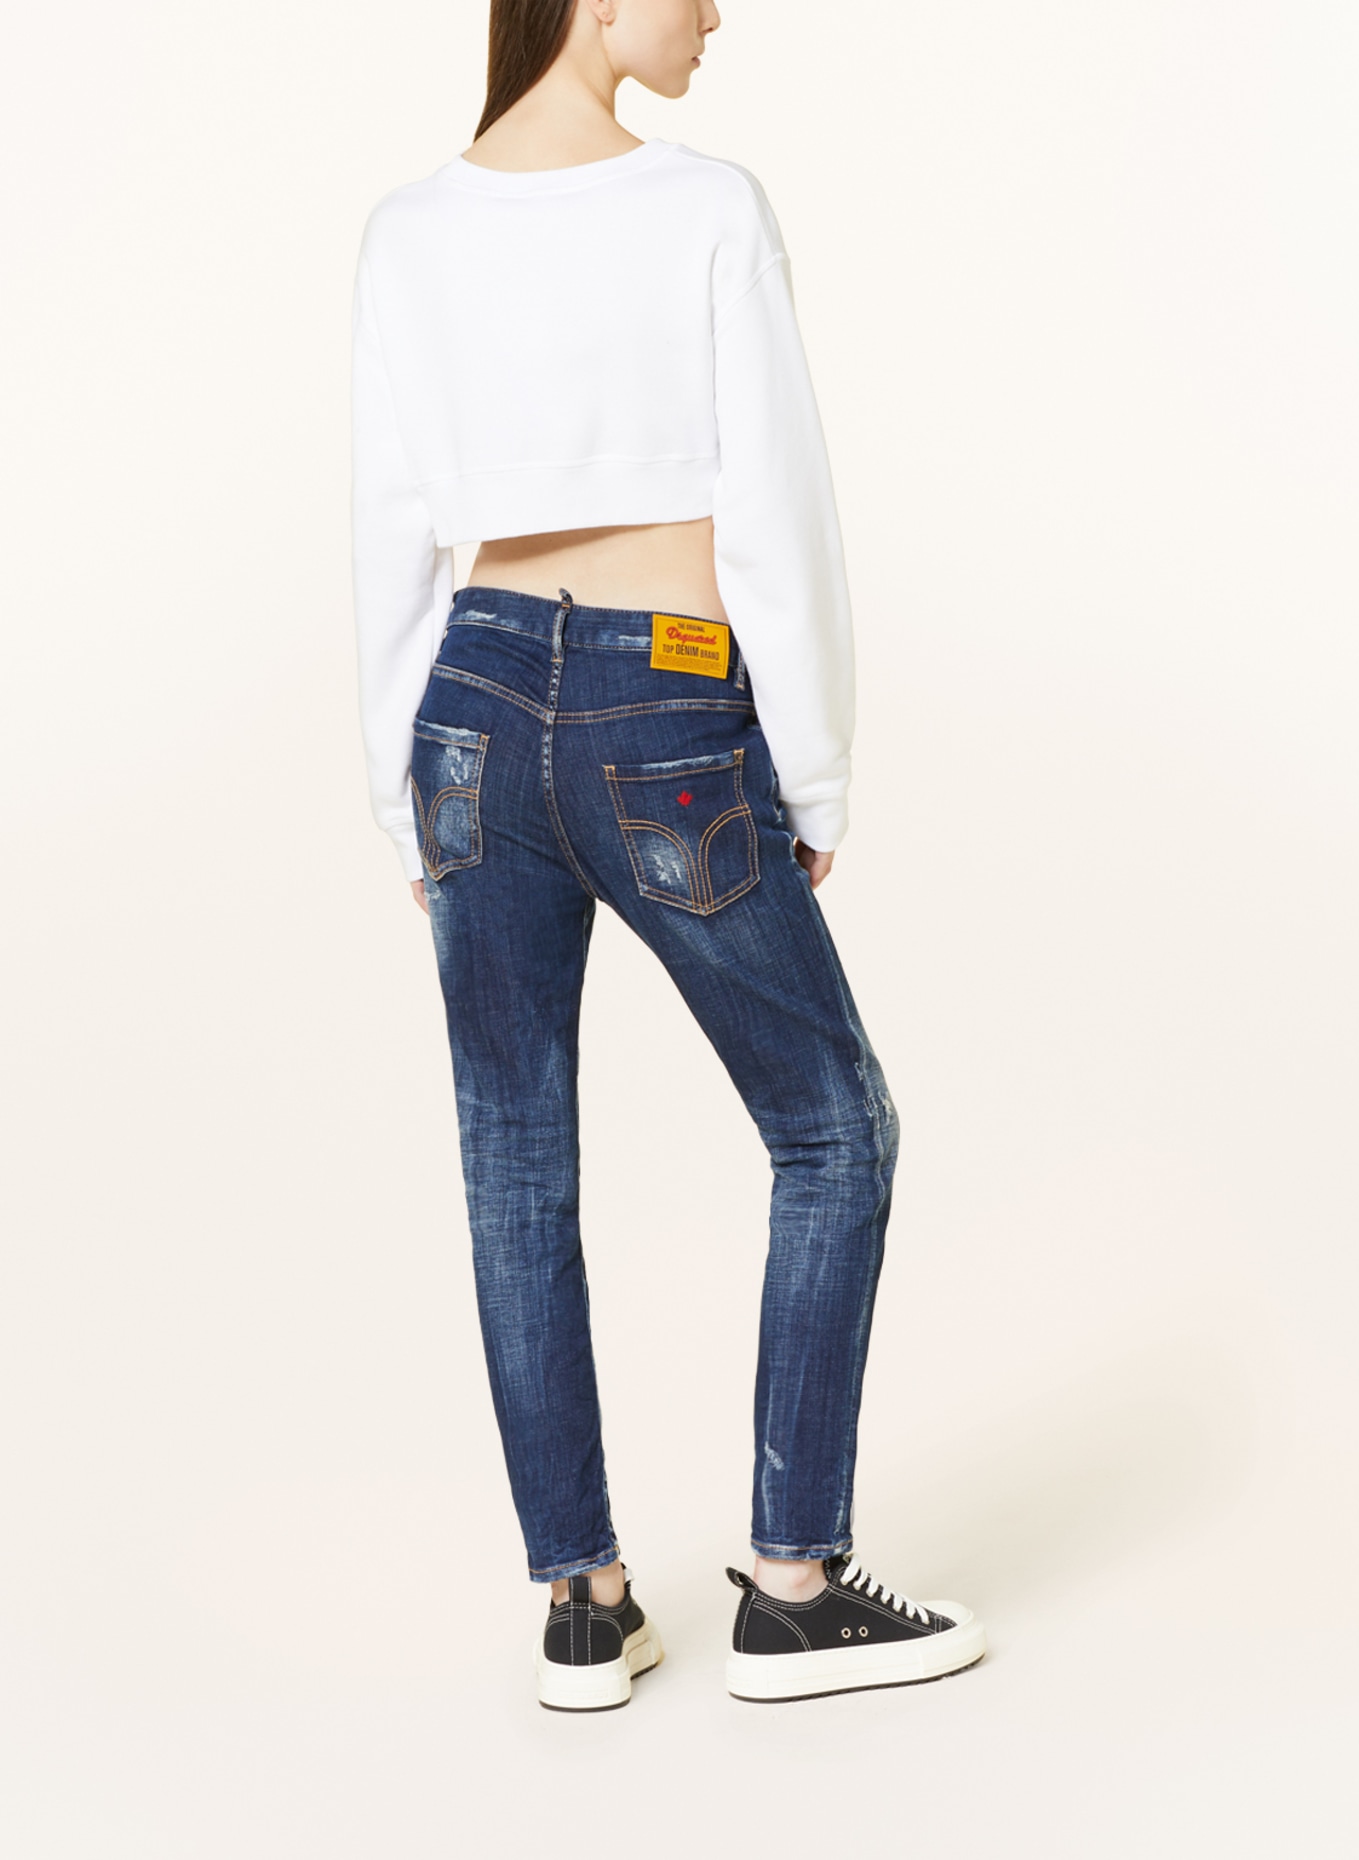 DSQUARED2 7/8-Jeans COOL GIRL, Farbe: 470 NAVY BLUE (Bild 3)